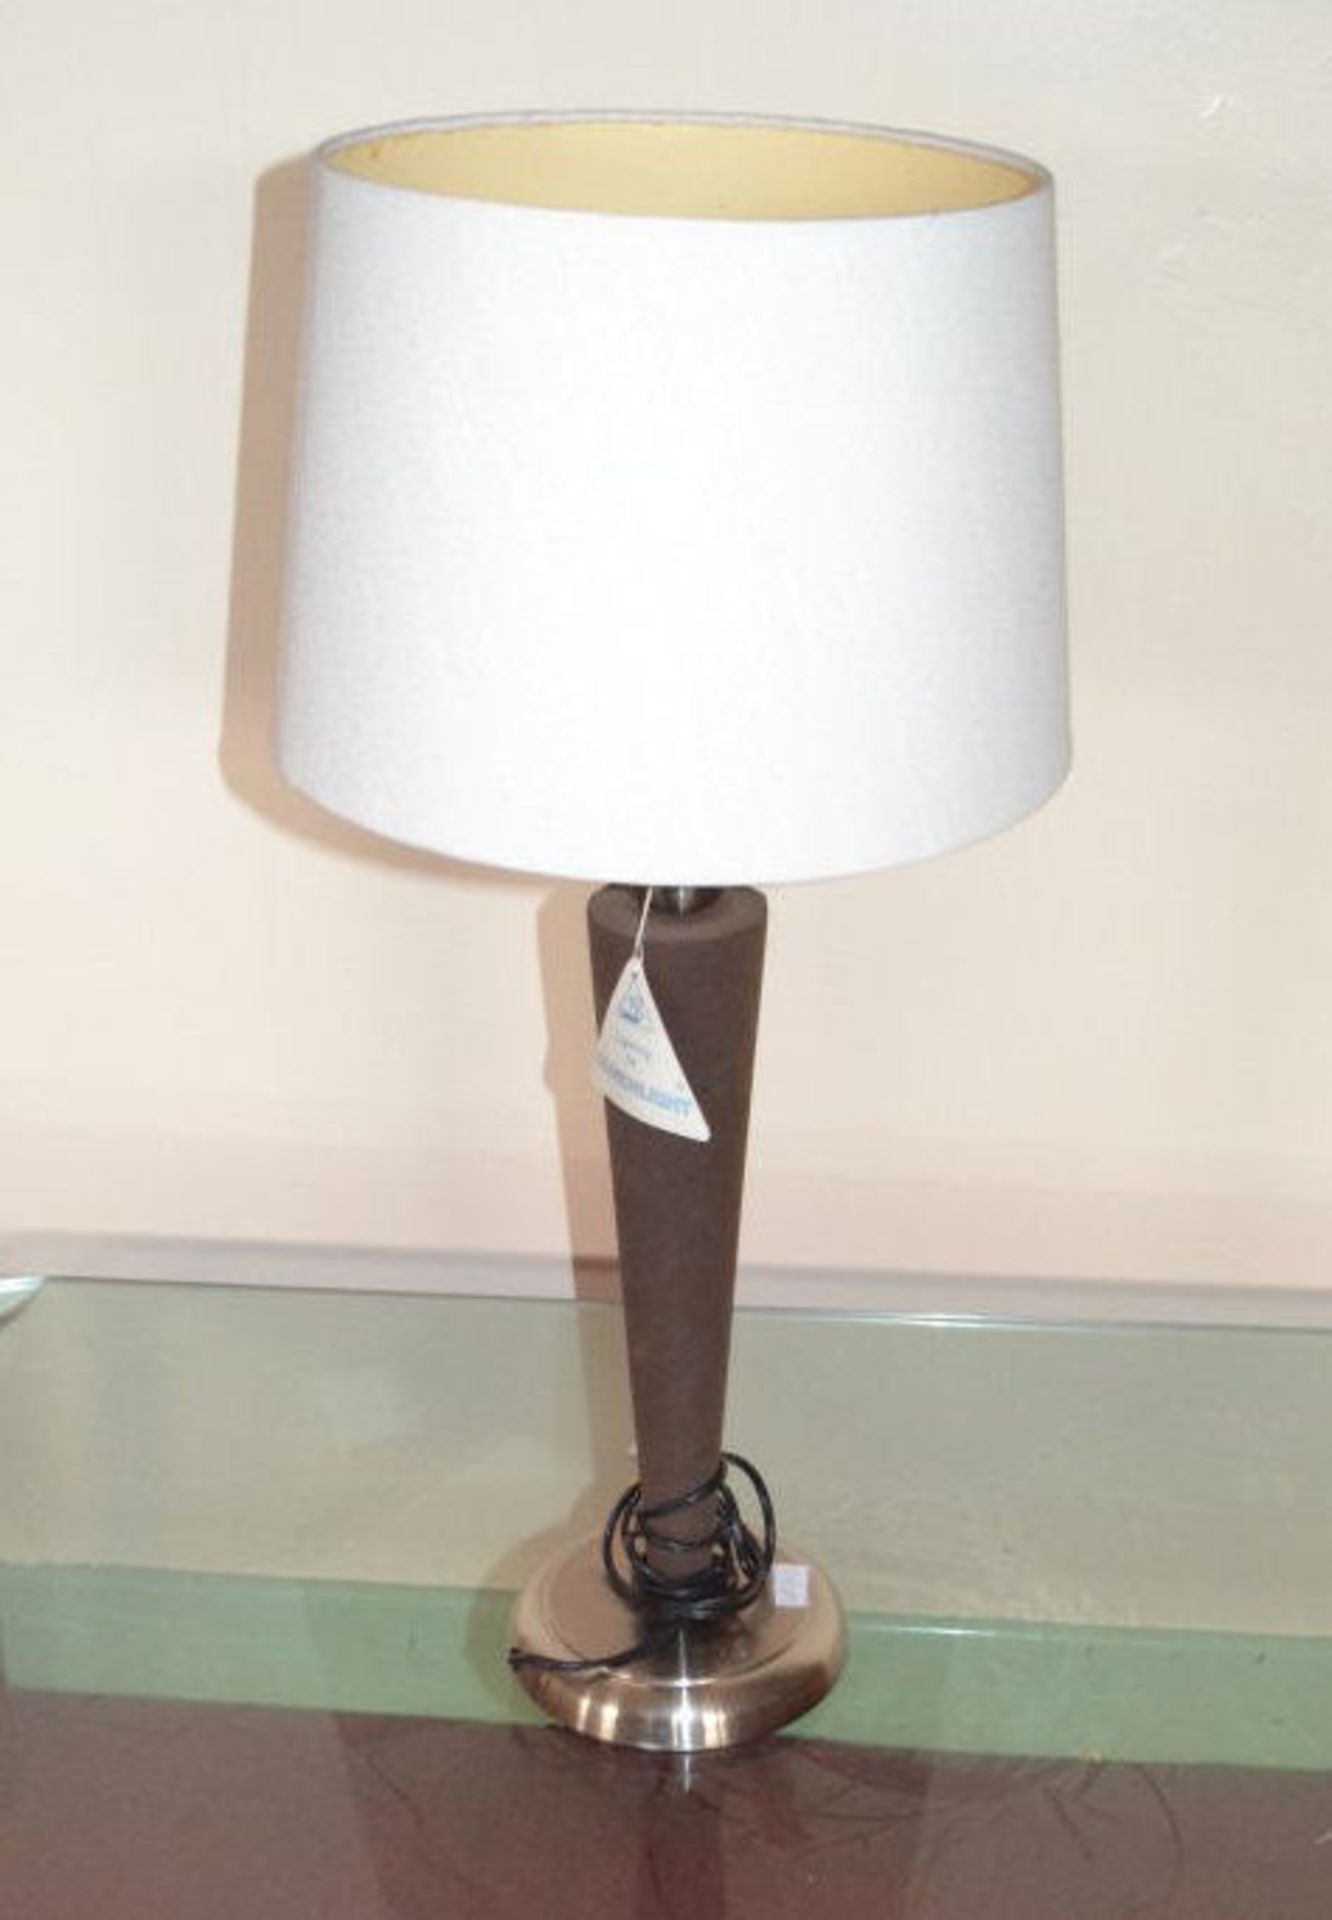 1 x Lamp - Brown Leather Look. With Round Shade. Original Retail £65. Height 71.5cm - CL108 - Image 2 of 3